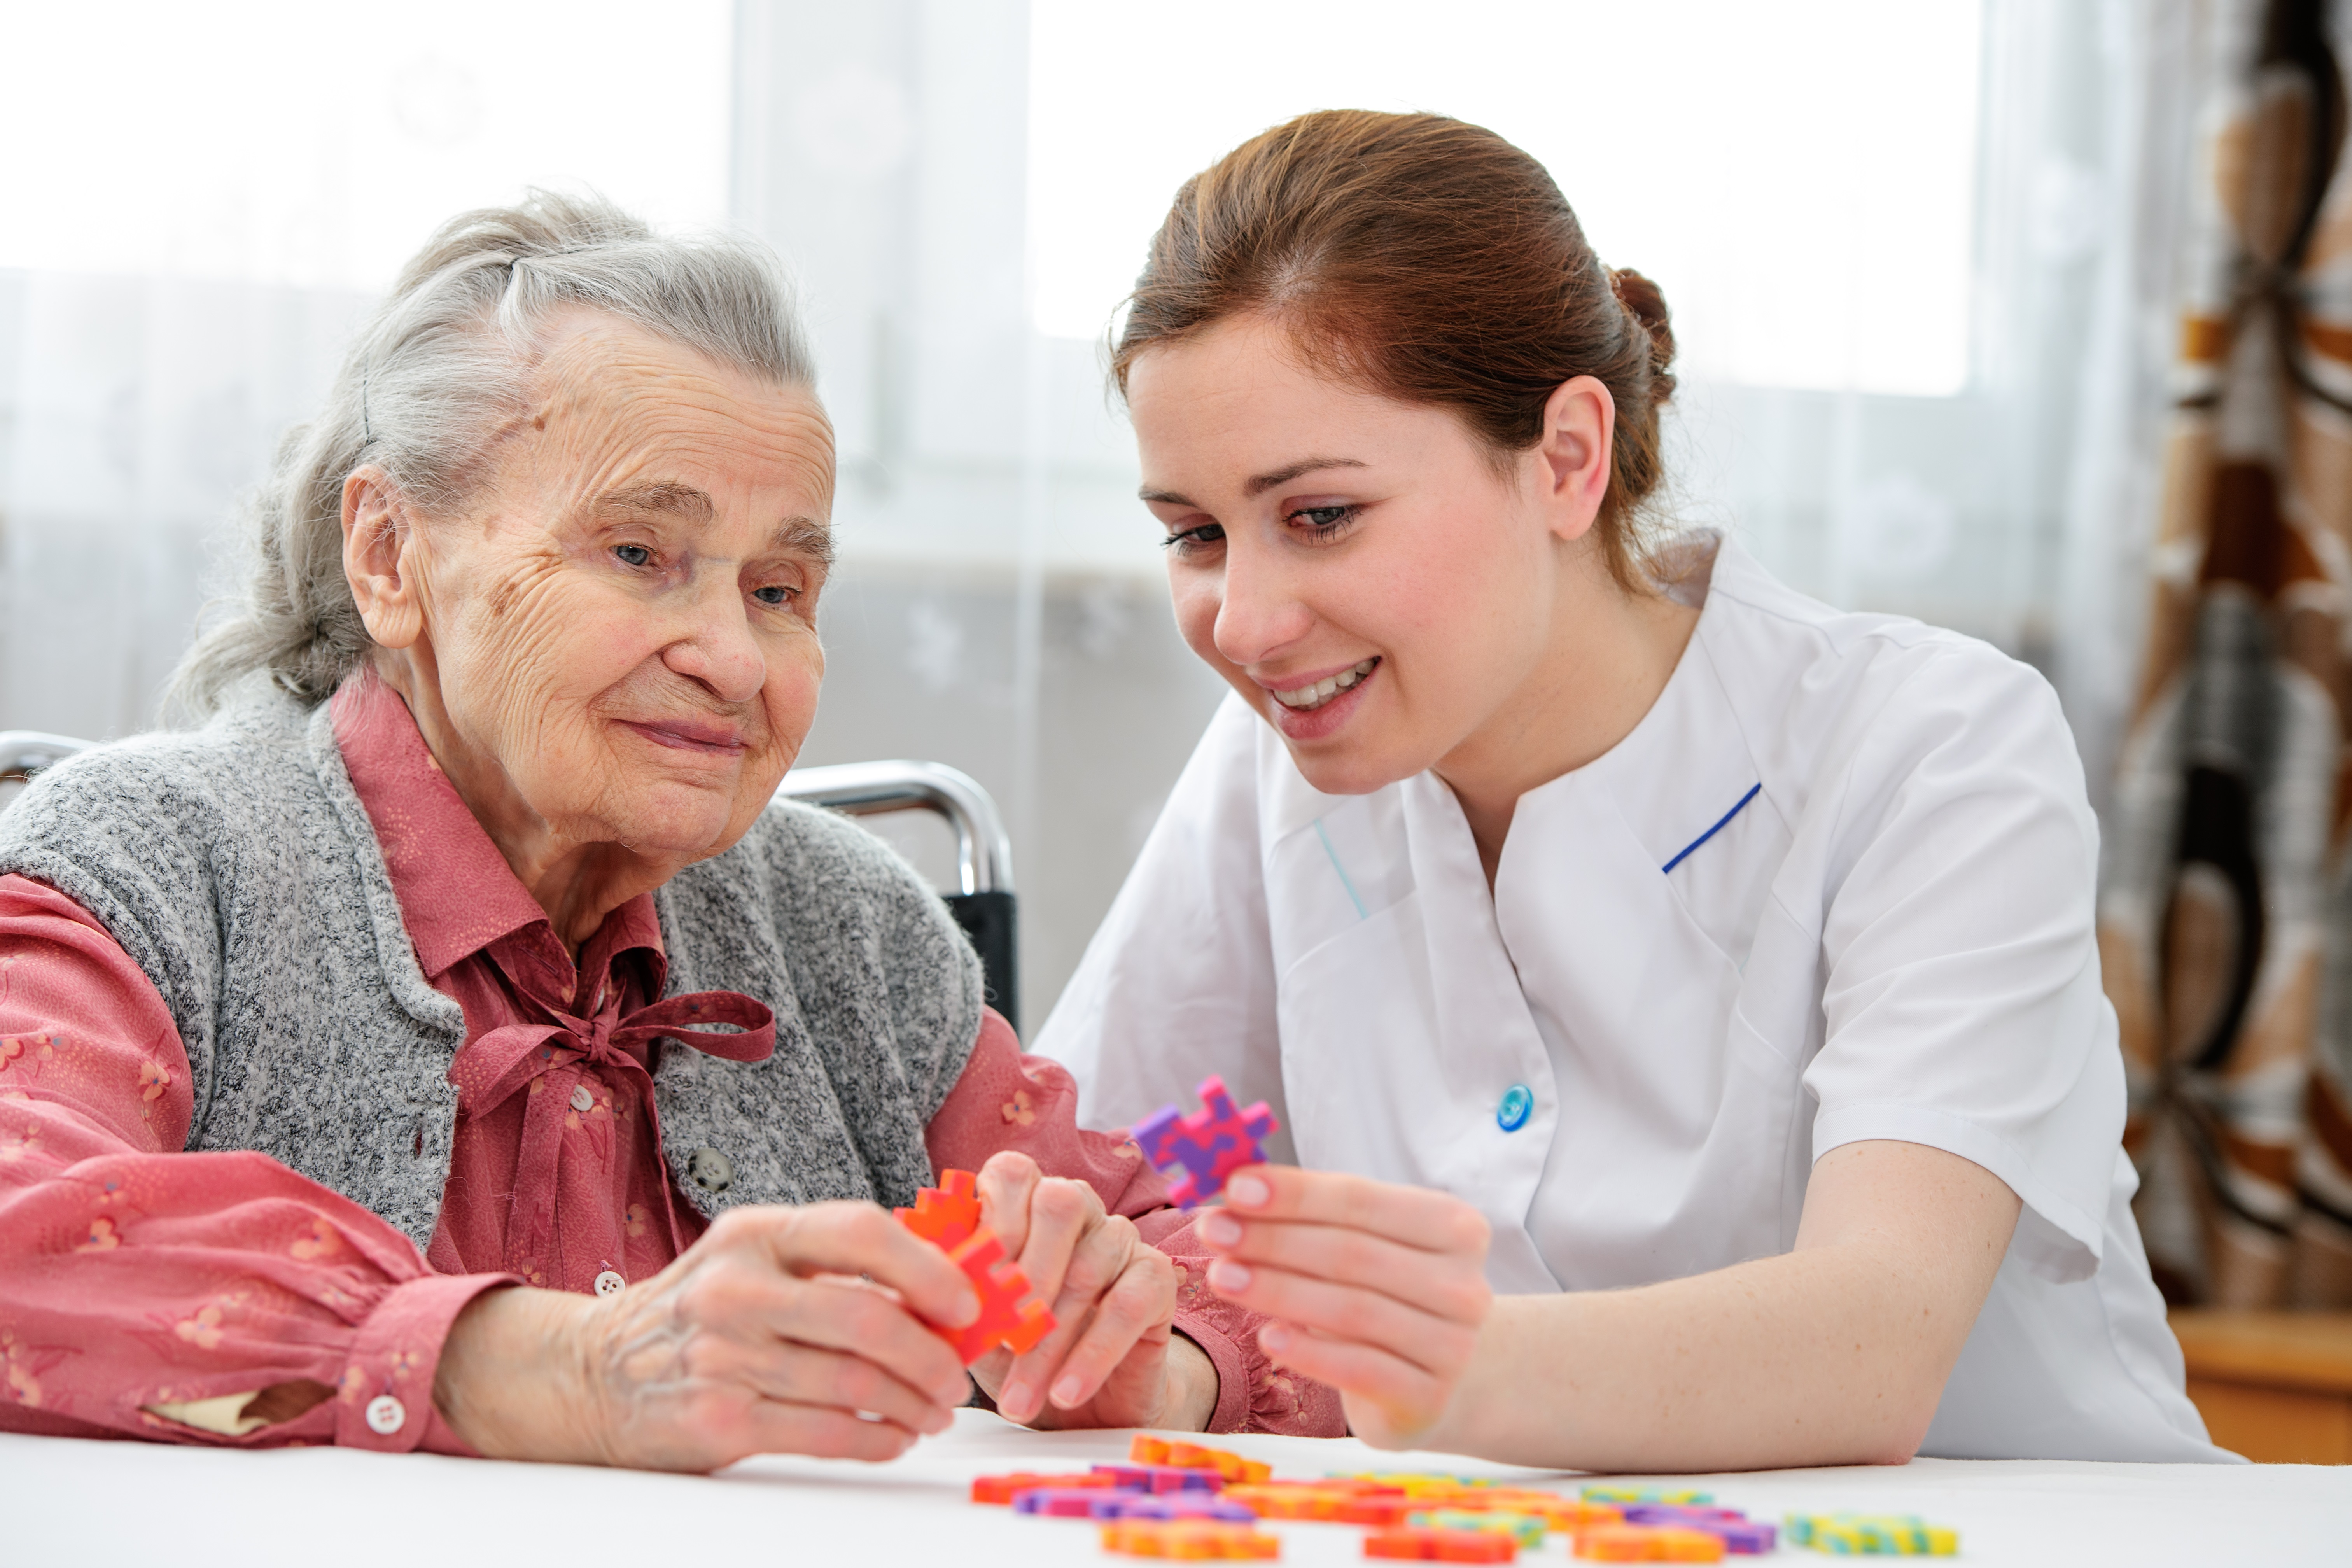 Aged Care worker with client playing a puzzle